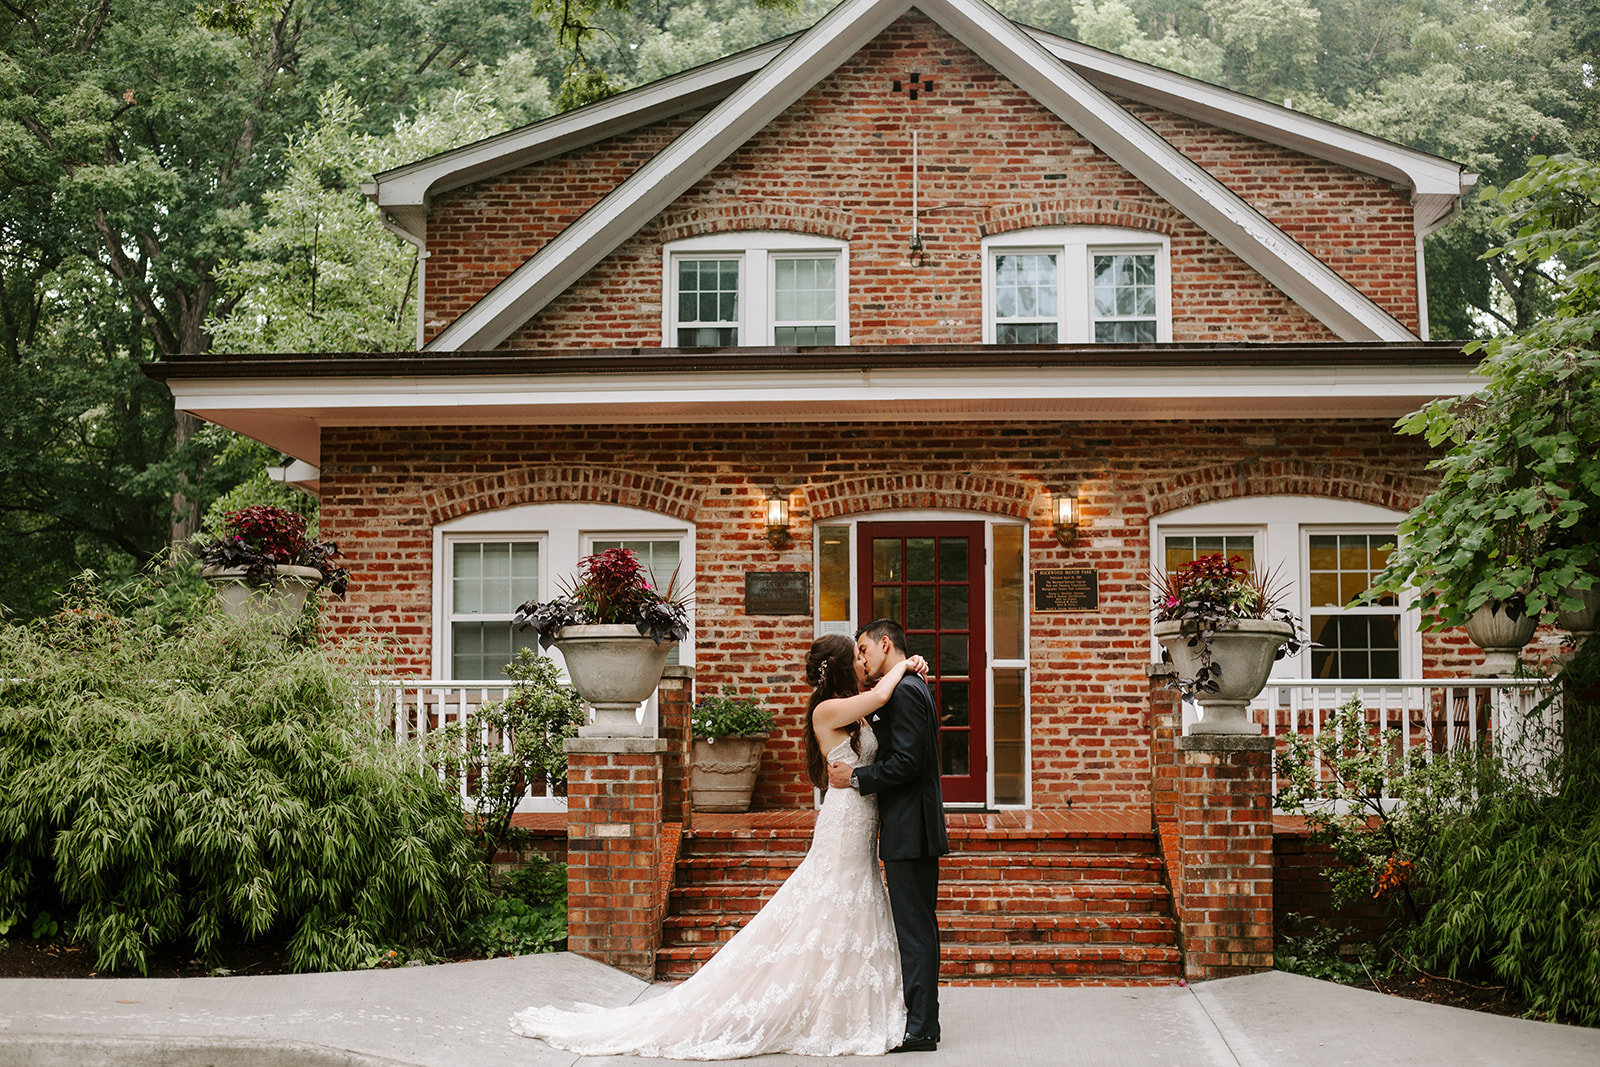 Bride and groom holding each other in front on an old brick home